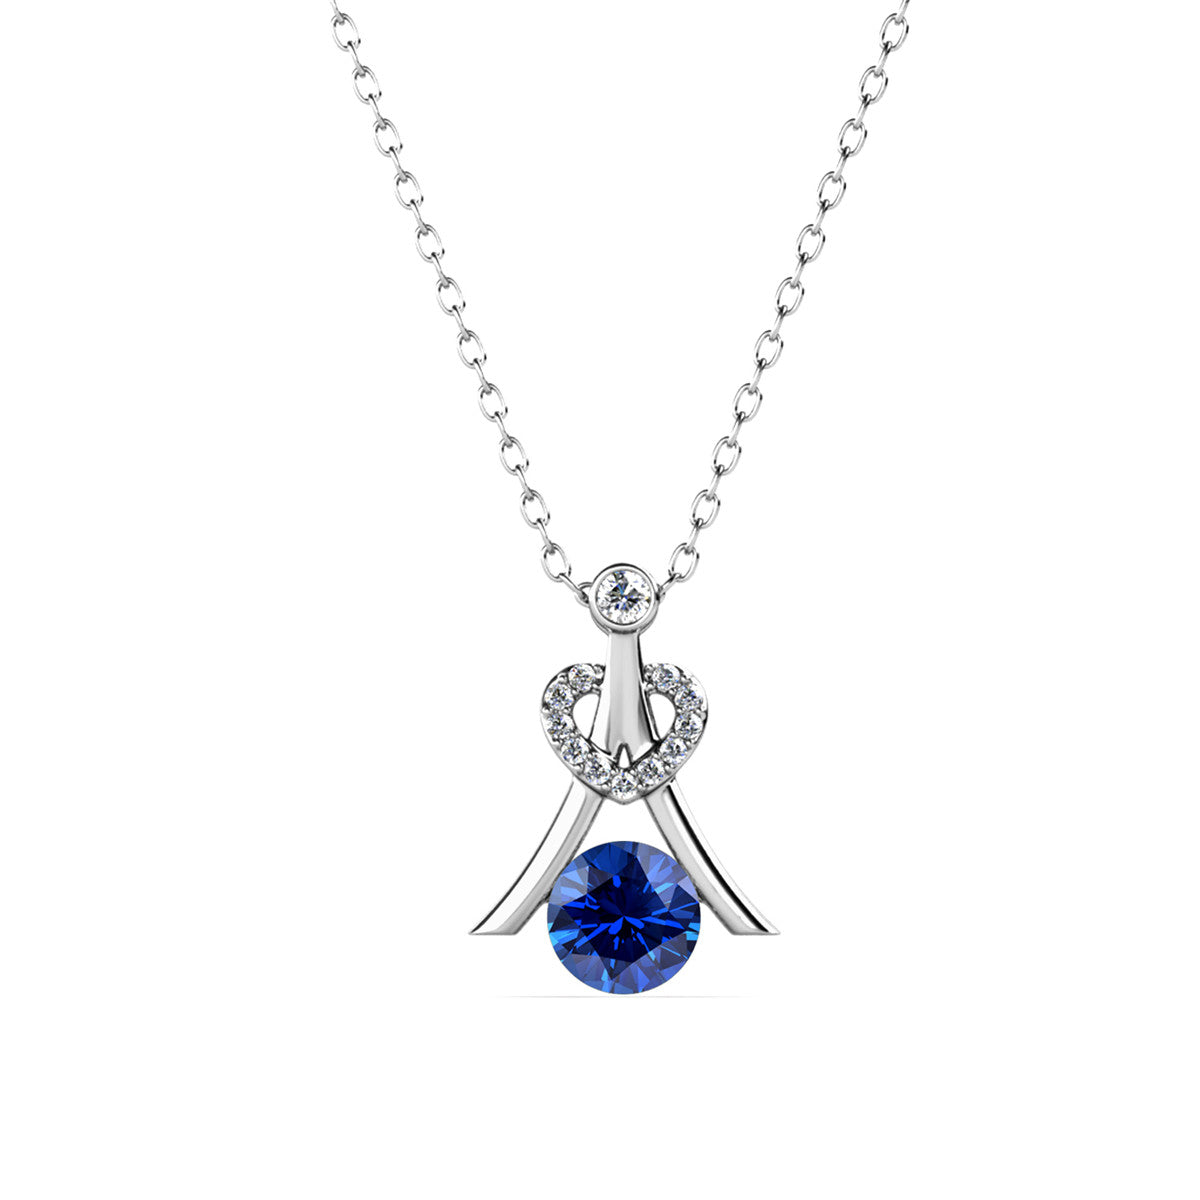 Serenity September Birthstone Sapphire Necklace, 18k White Gold Plated Silver Necklace with Round Cut Crystals